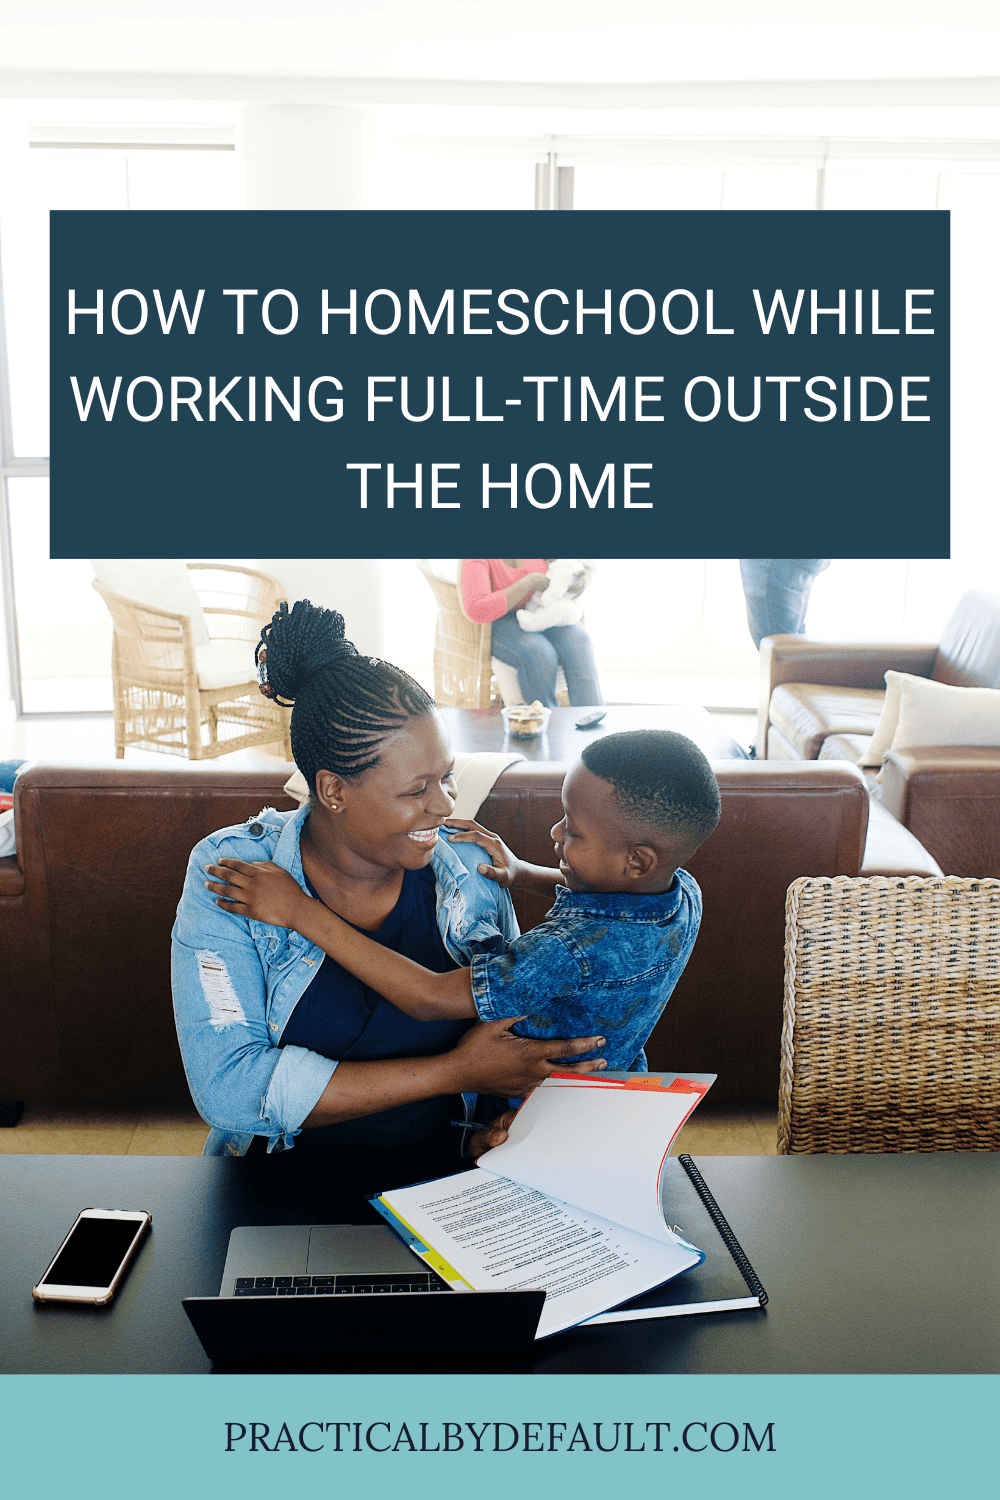 Teaching Children How to Fill Out Forms - Five J's Homeschool